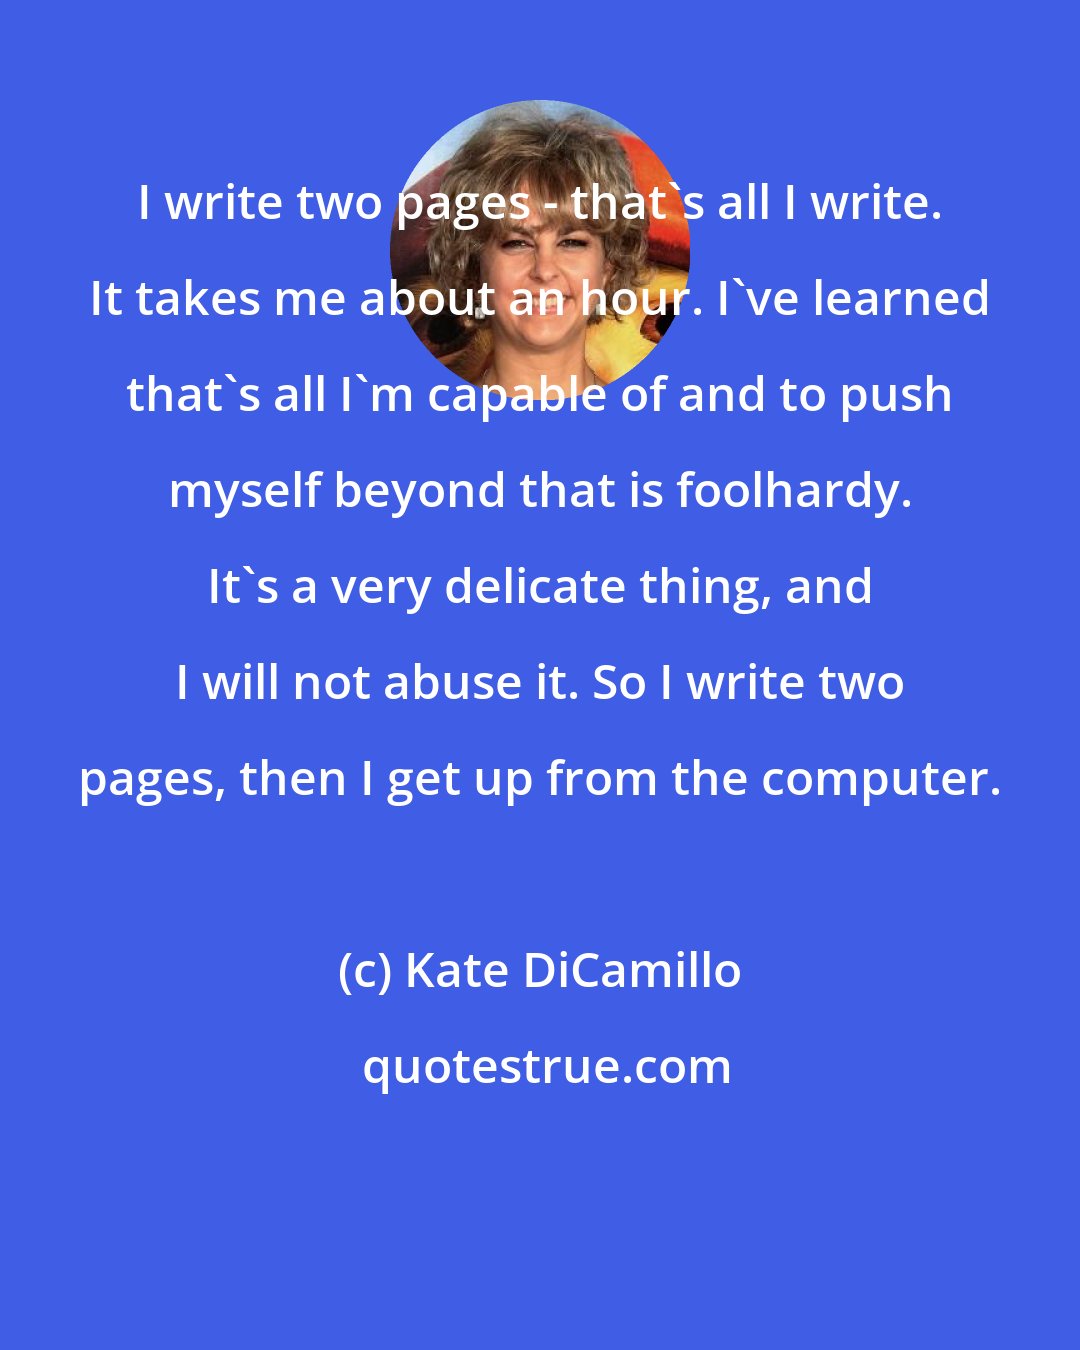 Kate DiCamillo: I write two pages - that's all I write. It takes me about an hour. I've learned that's all I'm capable of and to push myself beyond that is foolhardy. It's a very delicate thing, and I will not abuse it. So I write two pages, then I get up from the computer.